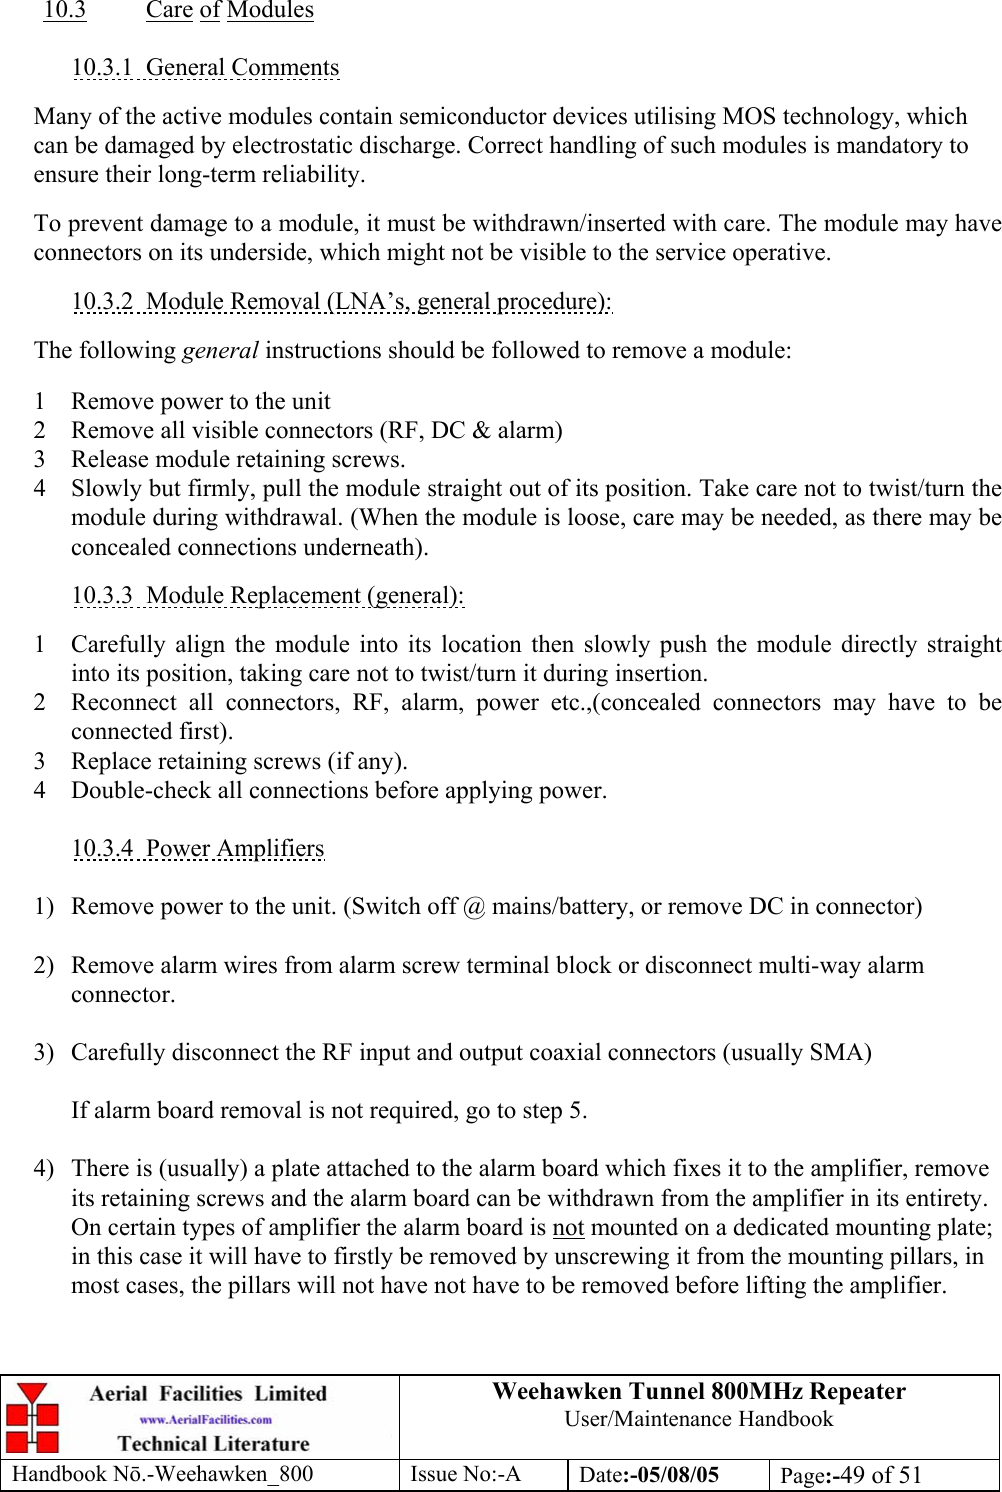 Weehawken Tunnel 800MHz Repeater User/Maintenance Handbook Handbook N.-Weehawken_800 Issue No:-A Date:-05/08/05  Page:-49 of 51   10.3 Care of Modules  10.3.1 General Comments  Many of the active modules contain semiconductor devices utilising MOS technology, which can be damaged by electrostatic discharge. Correct handling of such modules is mandatory to ensure their long-term reliability.  To prevent damage to a module, it must be withdrawn/inserted with care. The module may have connectors on its underside, which might not be visible to the service operative.  10.3.2  Module Removal (LNA’s, general procedure):  The following general instructions should be followed to remove a module:  1  Remove power to the unit 2  Remove all visible connectors (RF, DC &amp; alarm) 3  Release module retaining screws. 4  Slowly but firmly, pull the module straight out of its position. Take care not to twist/turn the module during withdrawal. (When the module is loose, care may be needed, as there may be concealed connections underneath).  10.3.3  Module Replacement (general):  1  Carefully align the module into its location then slowly push the module directly straight into its position, taking care not to twist/turn it during insertion. 2  Reconnect all connectors, RF, alarm, power etc.,(concealed connectors may have to be connected first). 3  Replace retaining screws (if any). 4  Double-check all connections before applying power.  10.3.4 Power Amplifiers  1)  Remove power to the unit. (Switch off @ mains/battery, or remove DC in connector)  2)  Remove alarm wires from alarm screw terminal block or disconnect multi-way alarm connector.  3)  Carefully disconnect the RF input and output coaxial connectors (usually SMA)  If alarm board removal is not required, go to step 5.  4)  There is (usually) a plate attached to the alarm board which fixes it to the amplifier, remove its retaining screws and the alarm board can be withdrawn from the amplifier in its entirety. On certain types of amplifier the alarm board is not mounted on a dedicated mounting plate; in this case it will have to firstly be removed by unscrewing it from the mounting pillars, in most cases, the pillars will not have not have to be removed before lifting the amplifier.   